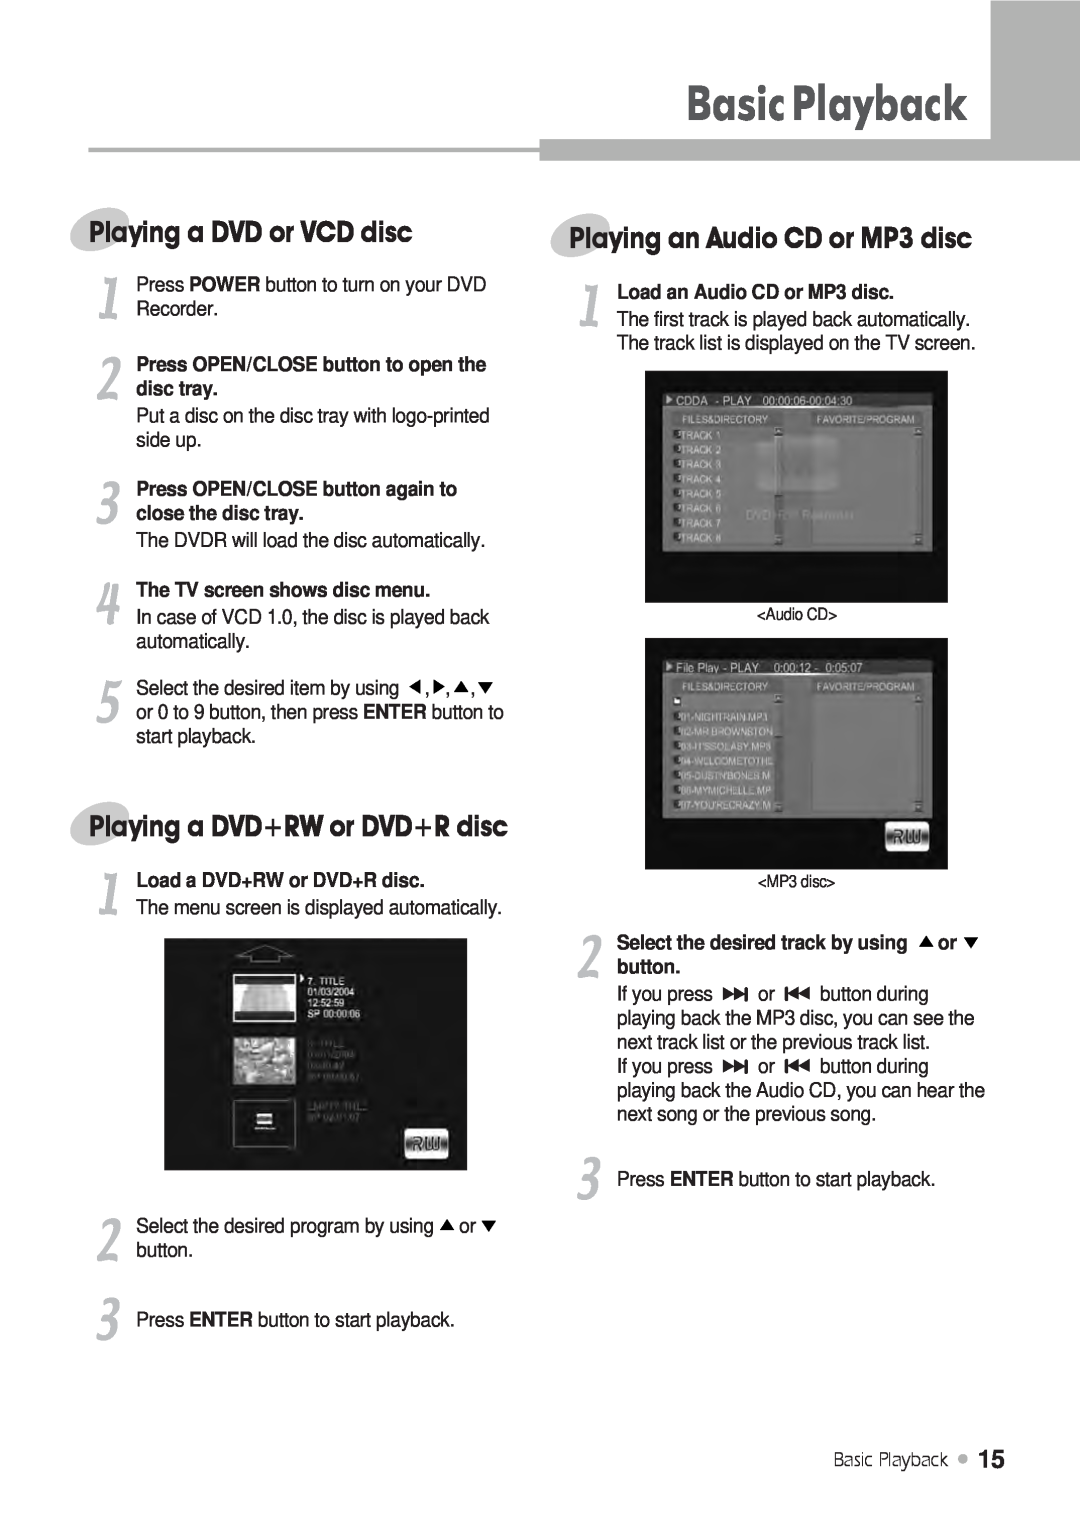 H & B DRX-430 BasicPlayback, Playing a DVD or VCD disc, Playing an Audio CD or MP3 disc, Playing a DVD+RW or DVD+R disc 